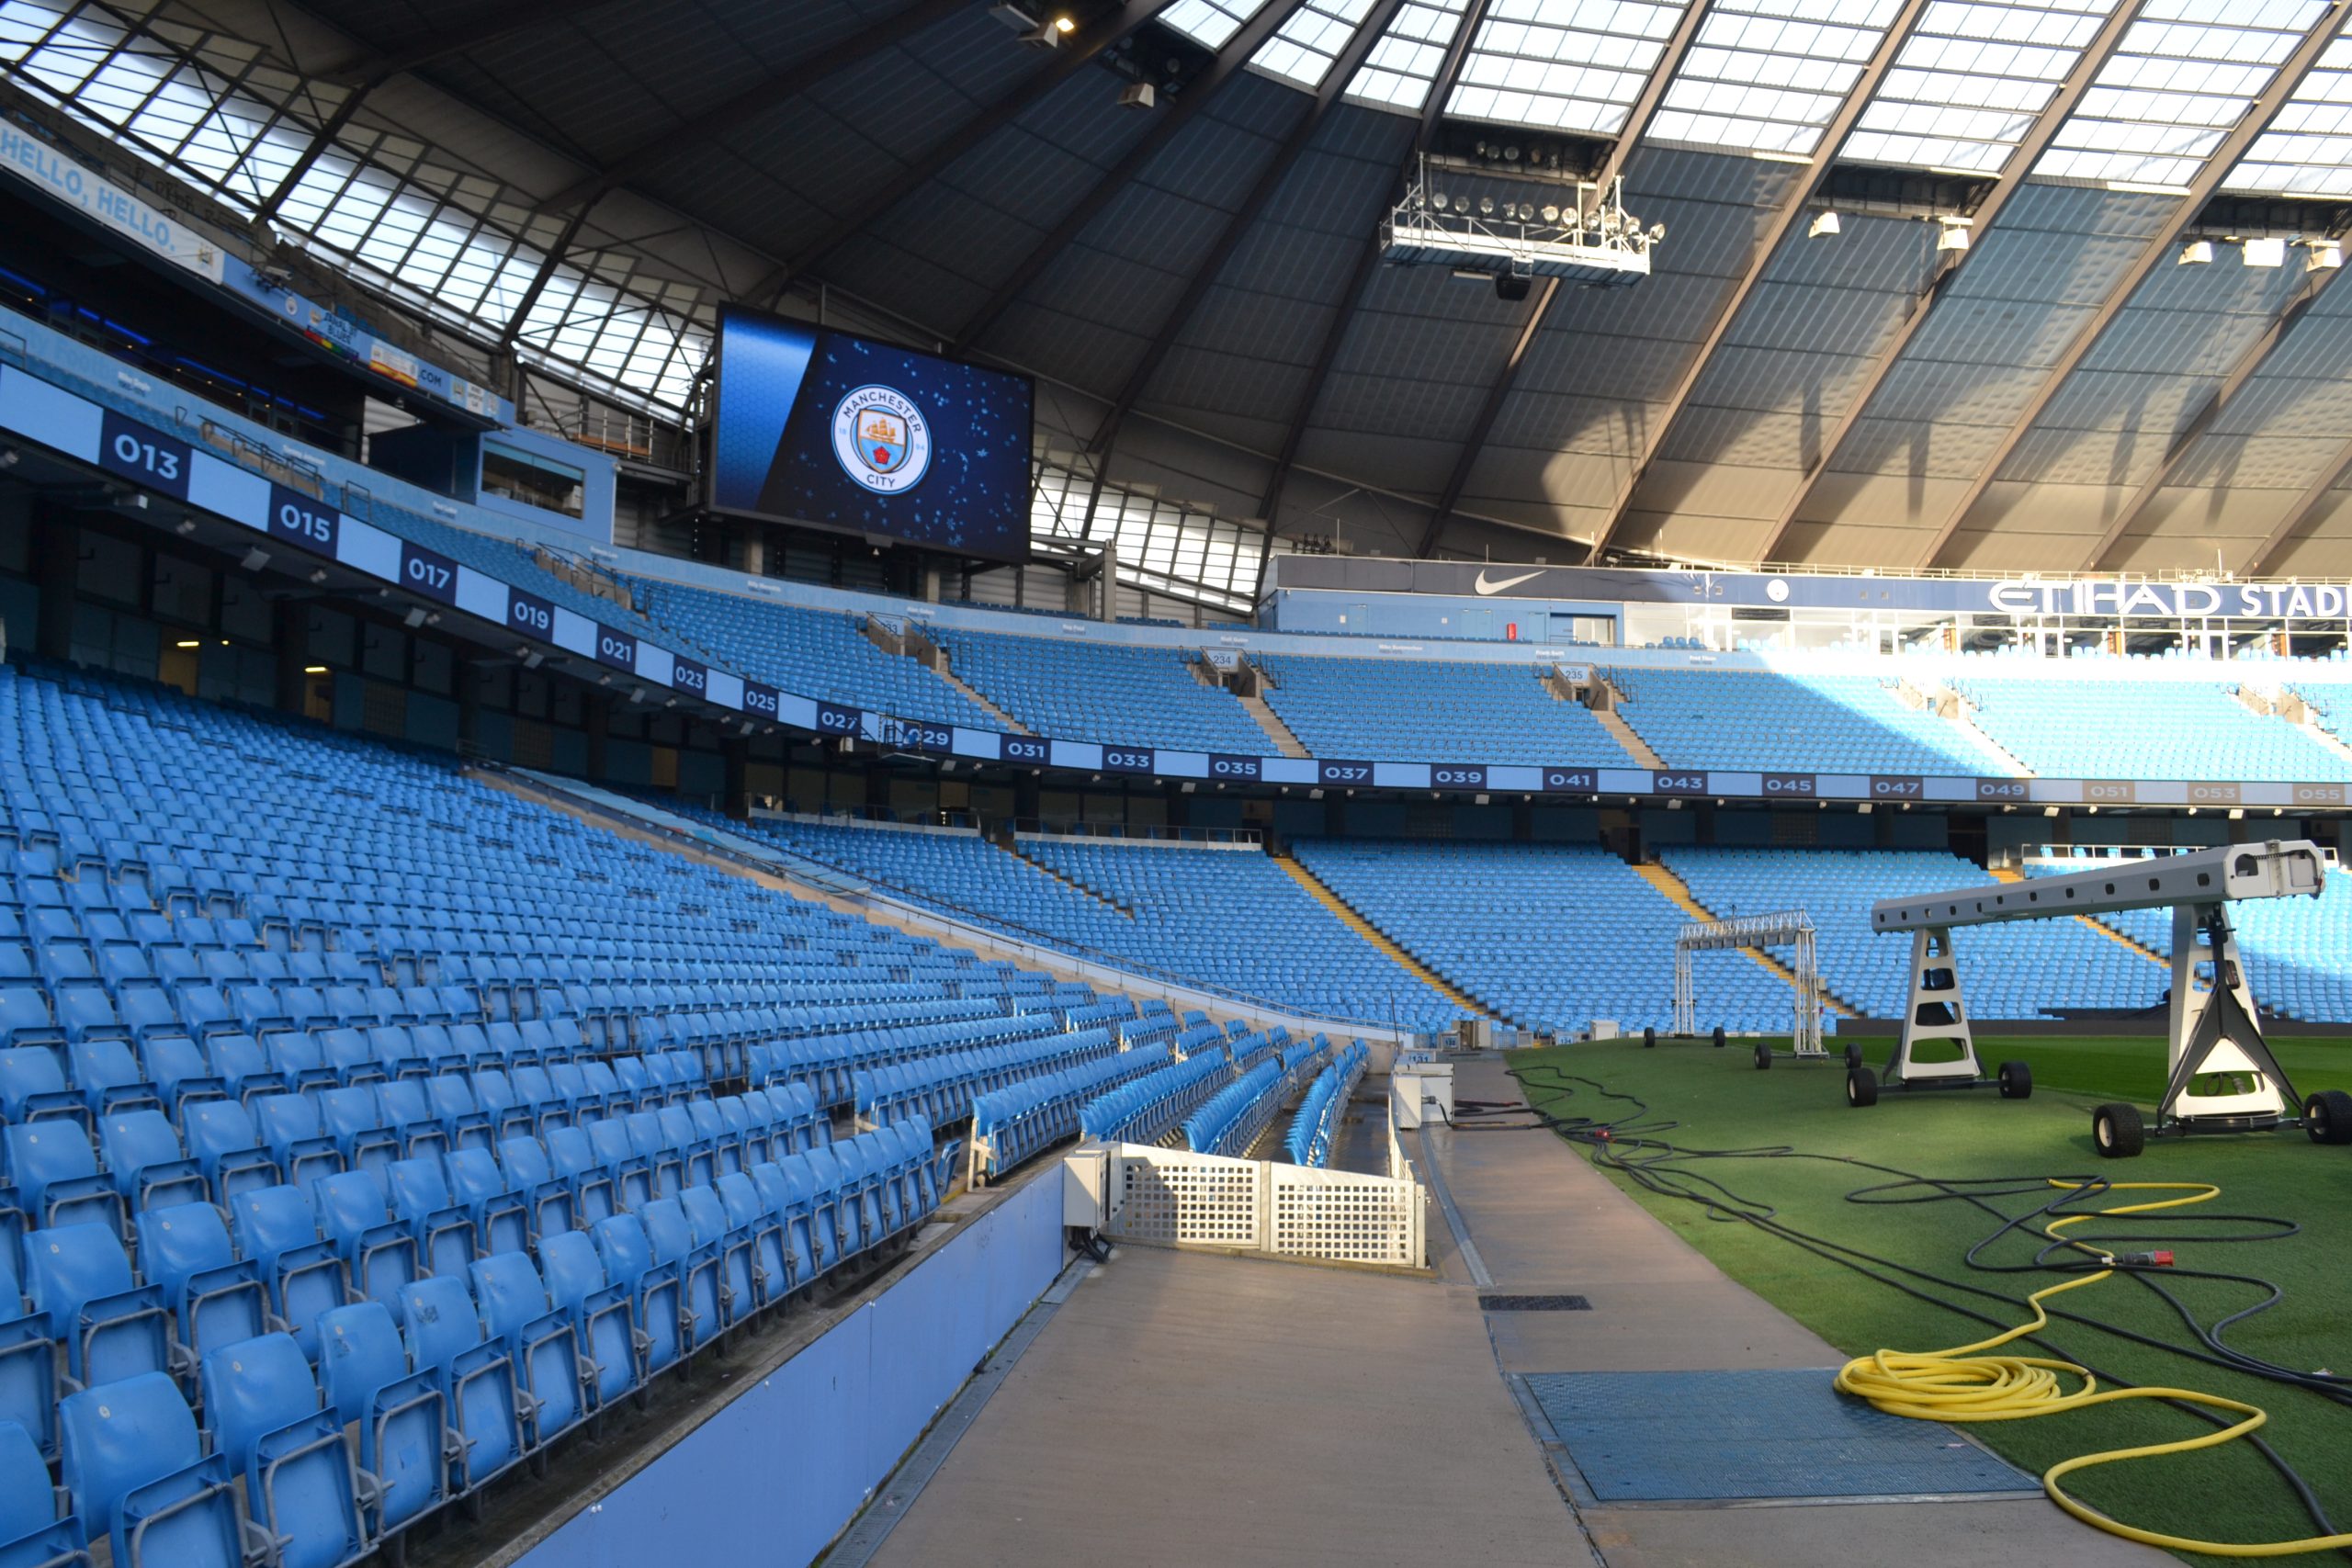 Pitchside at Manchester City's Etihad Stadium- Jeremy Doku Expected Soon